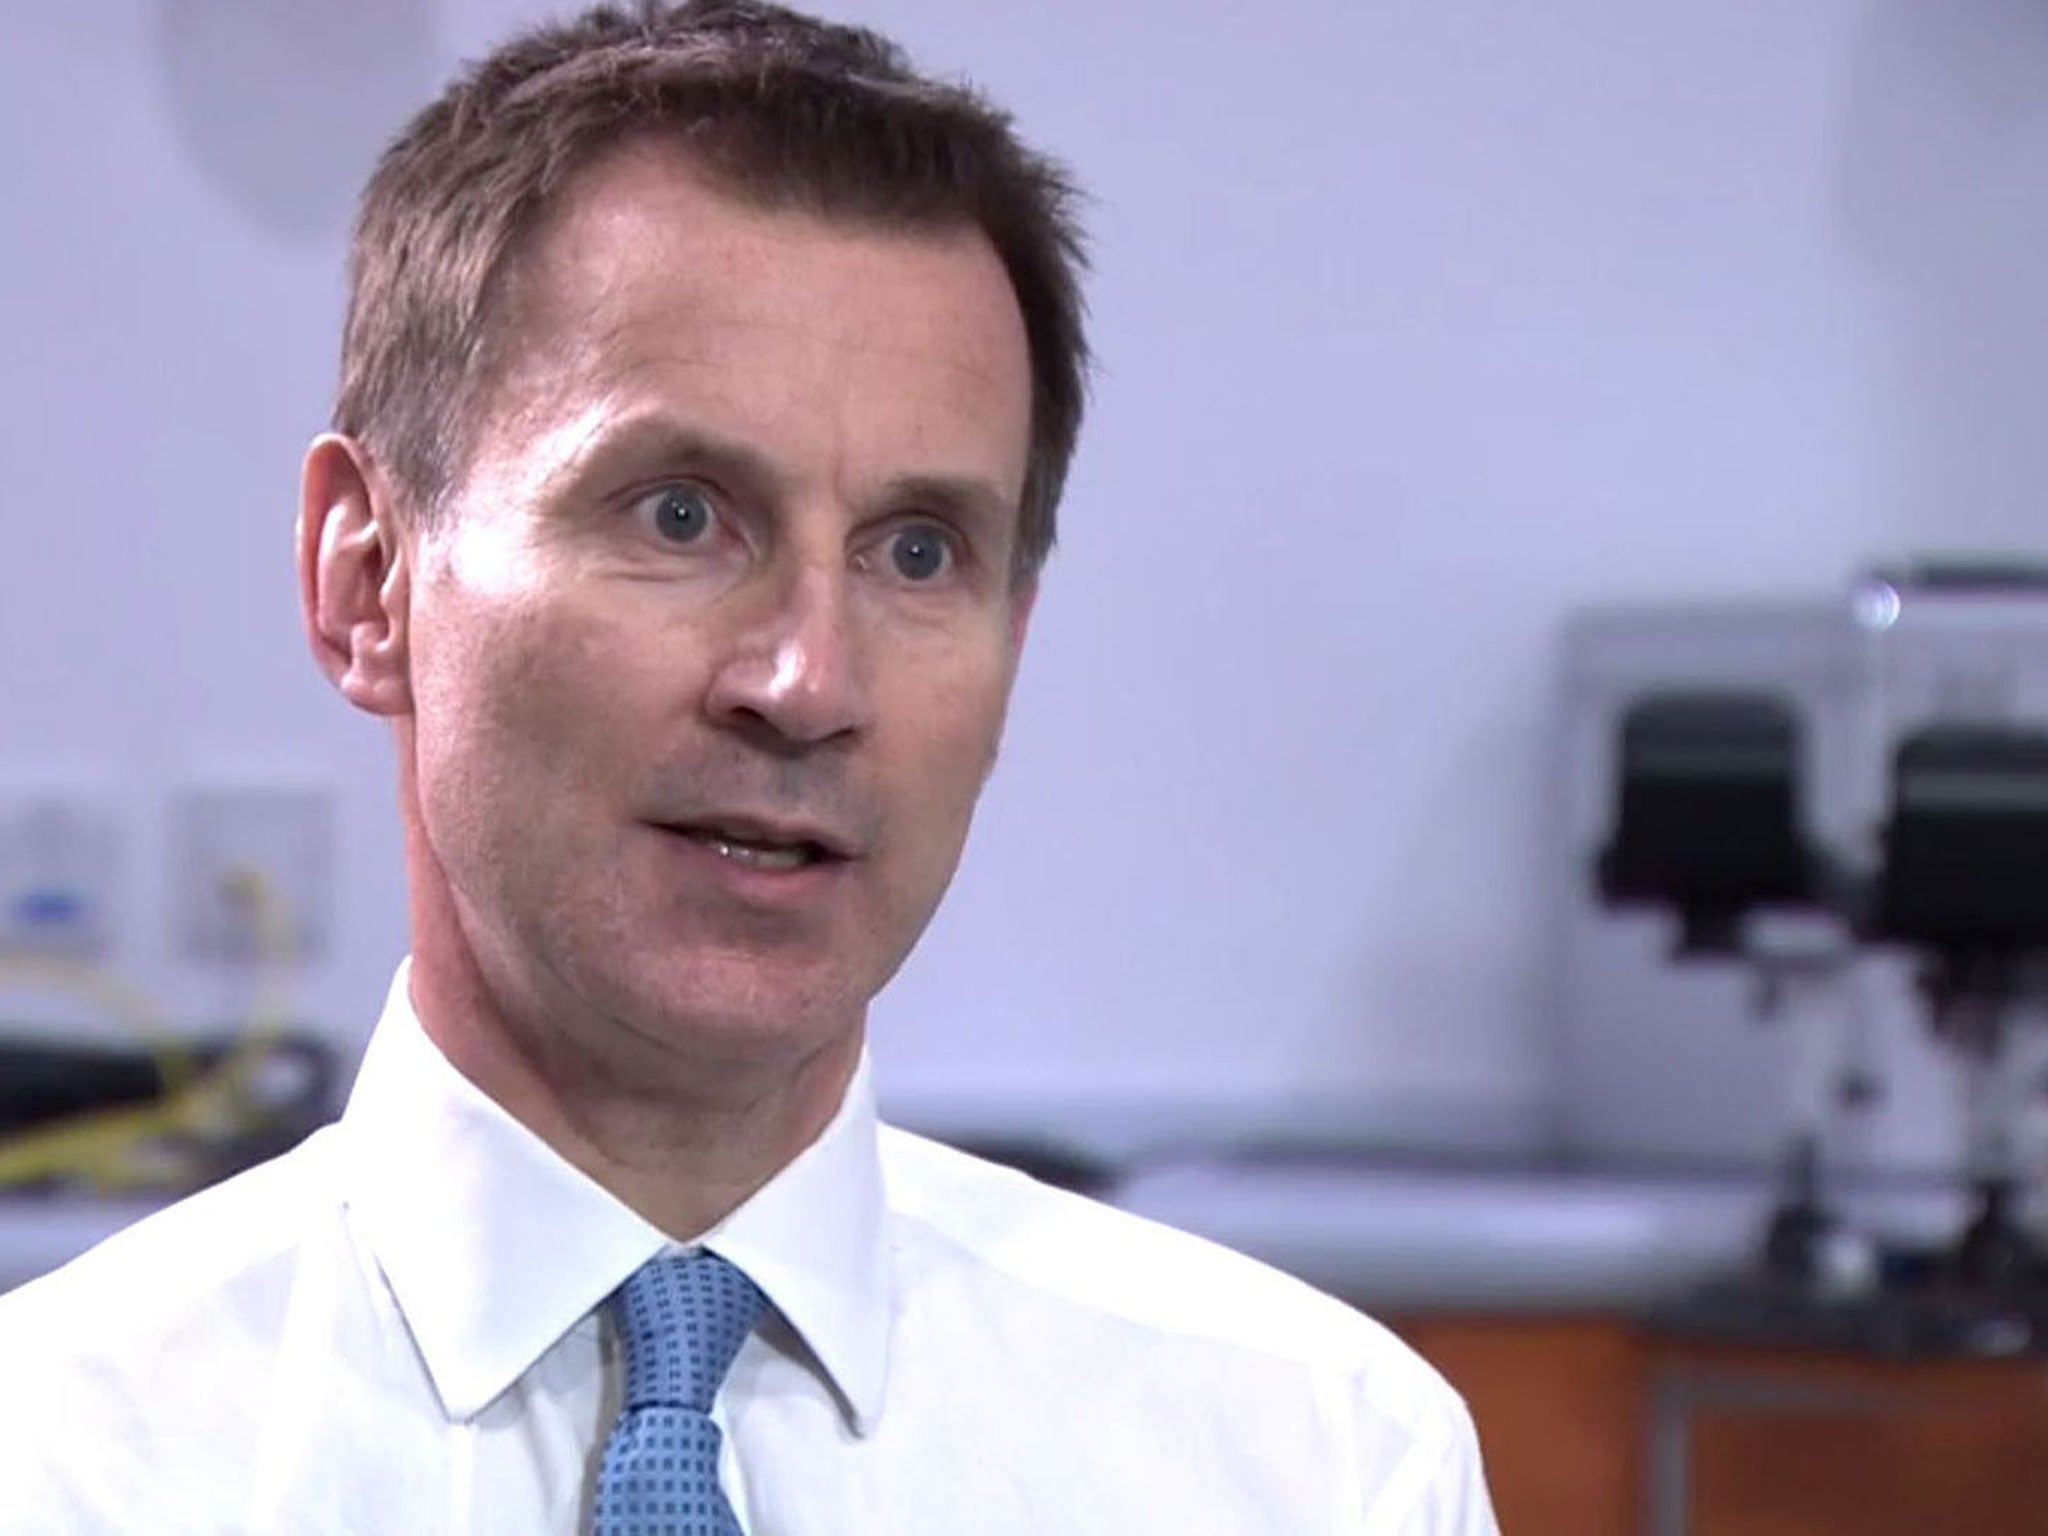 ‘The particular pressure point we have is A&E,’ says Hunt